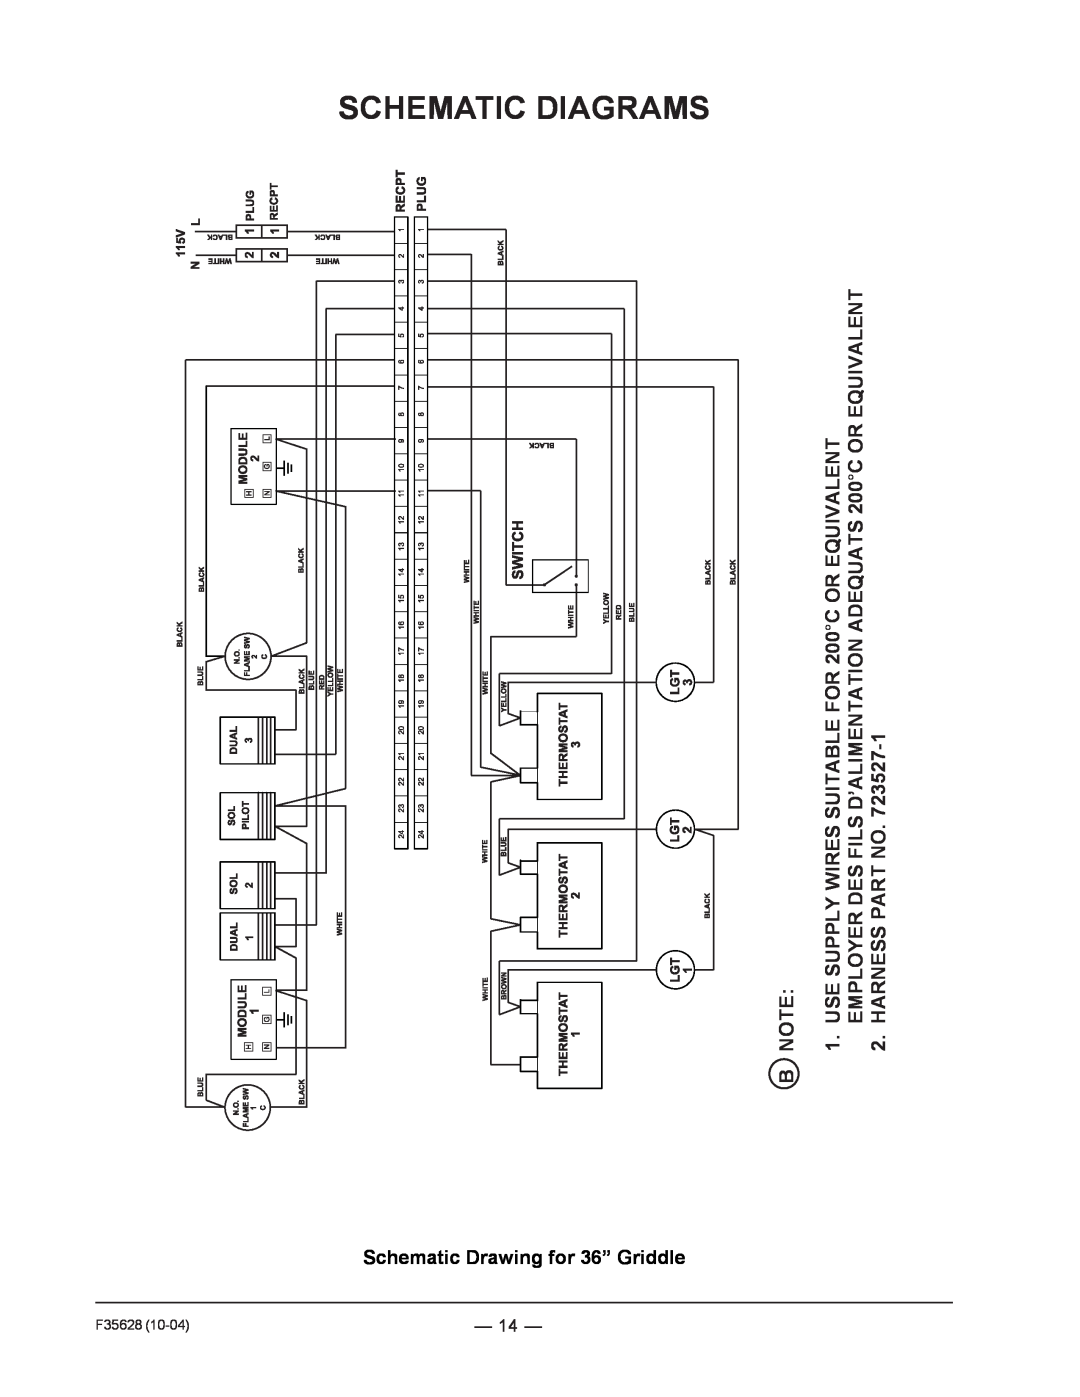 Vulcan-Hart service manual Schematic Drawing for 36” Griddle, Schematic Diagrams, F35628 